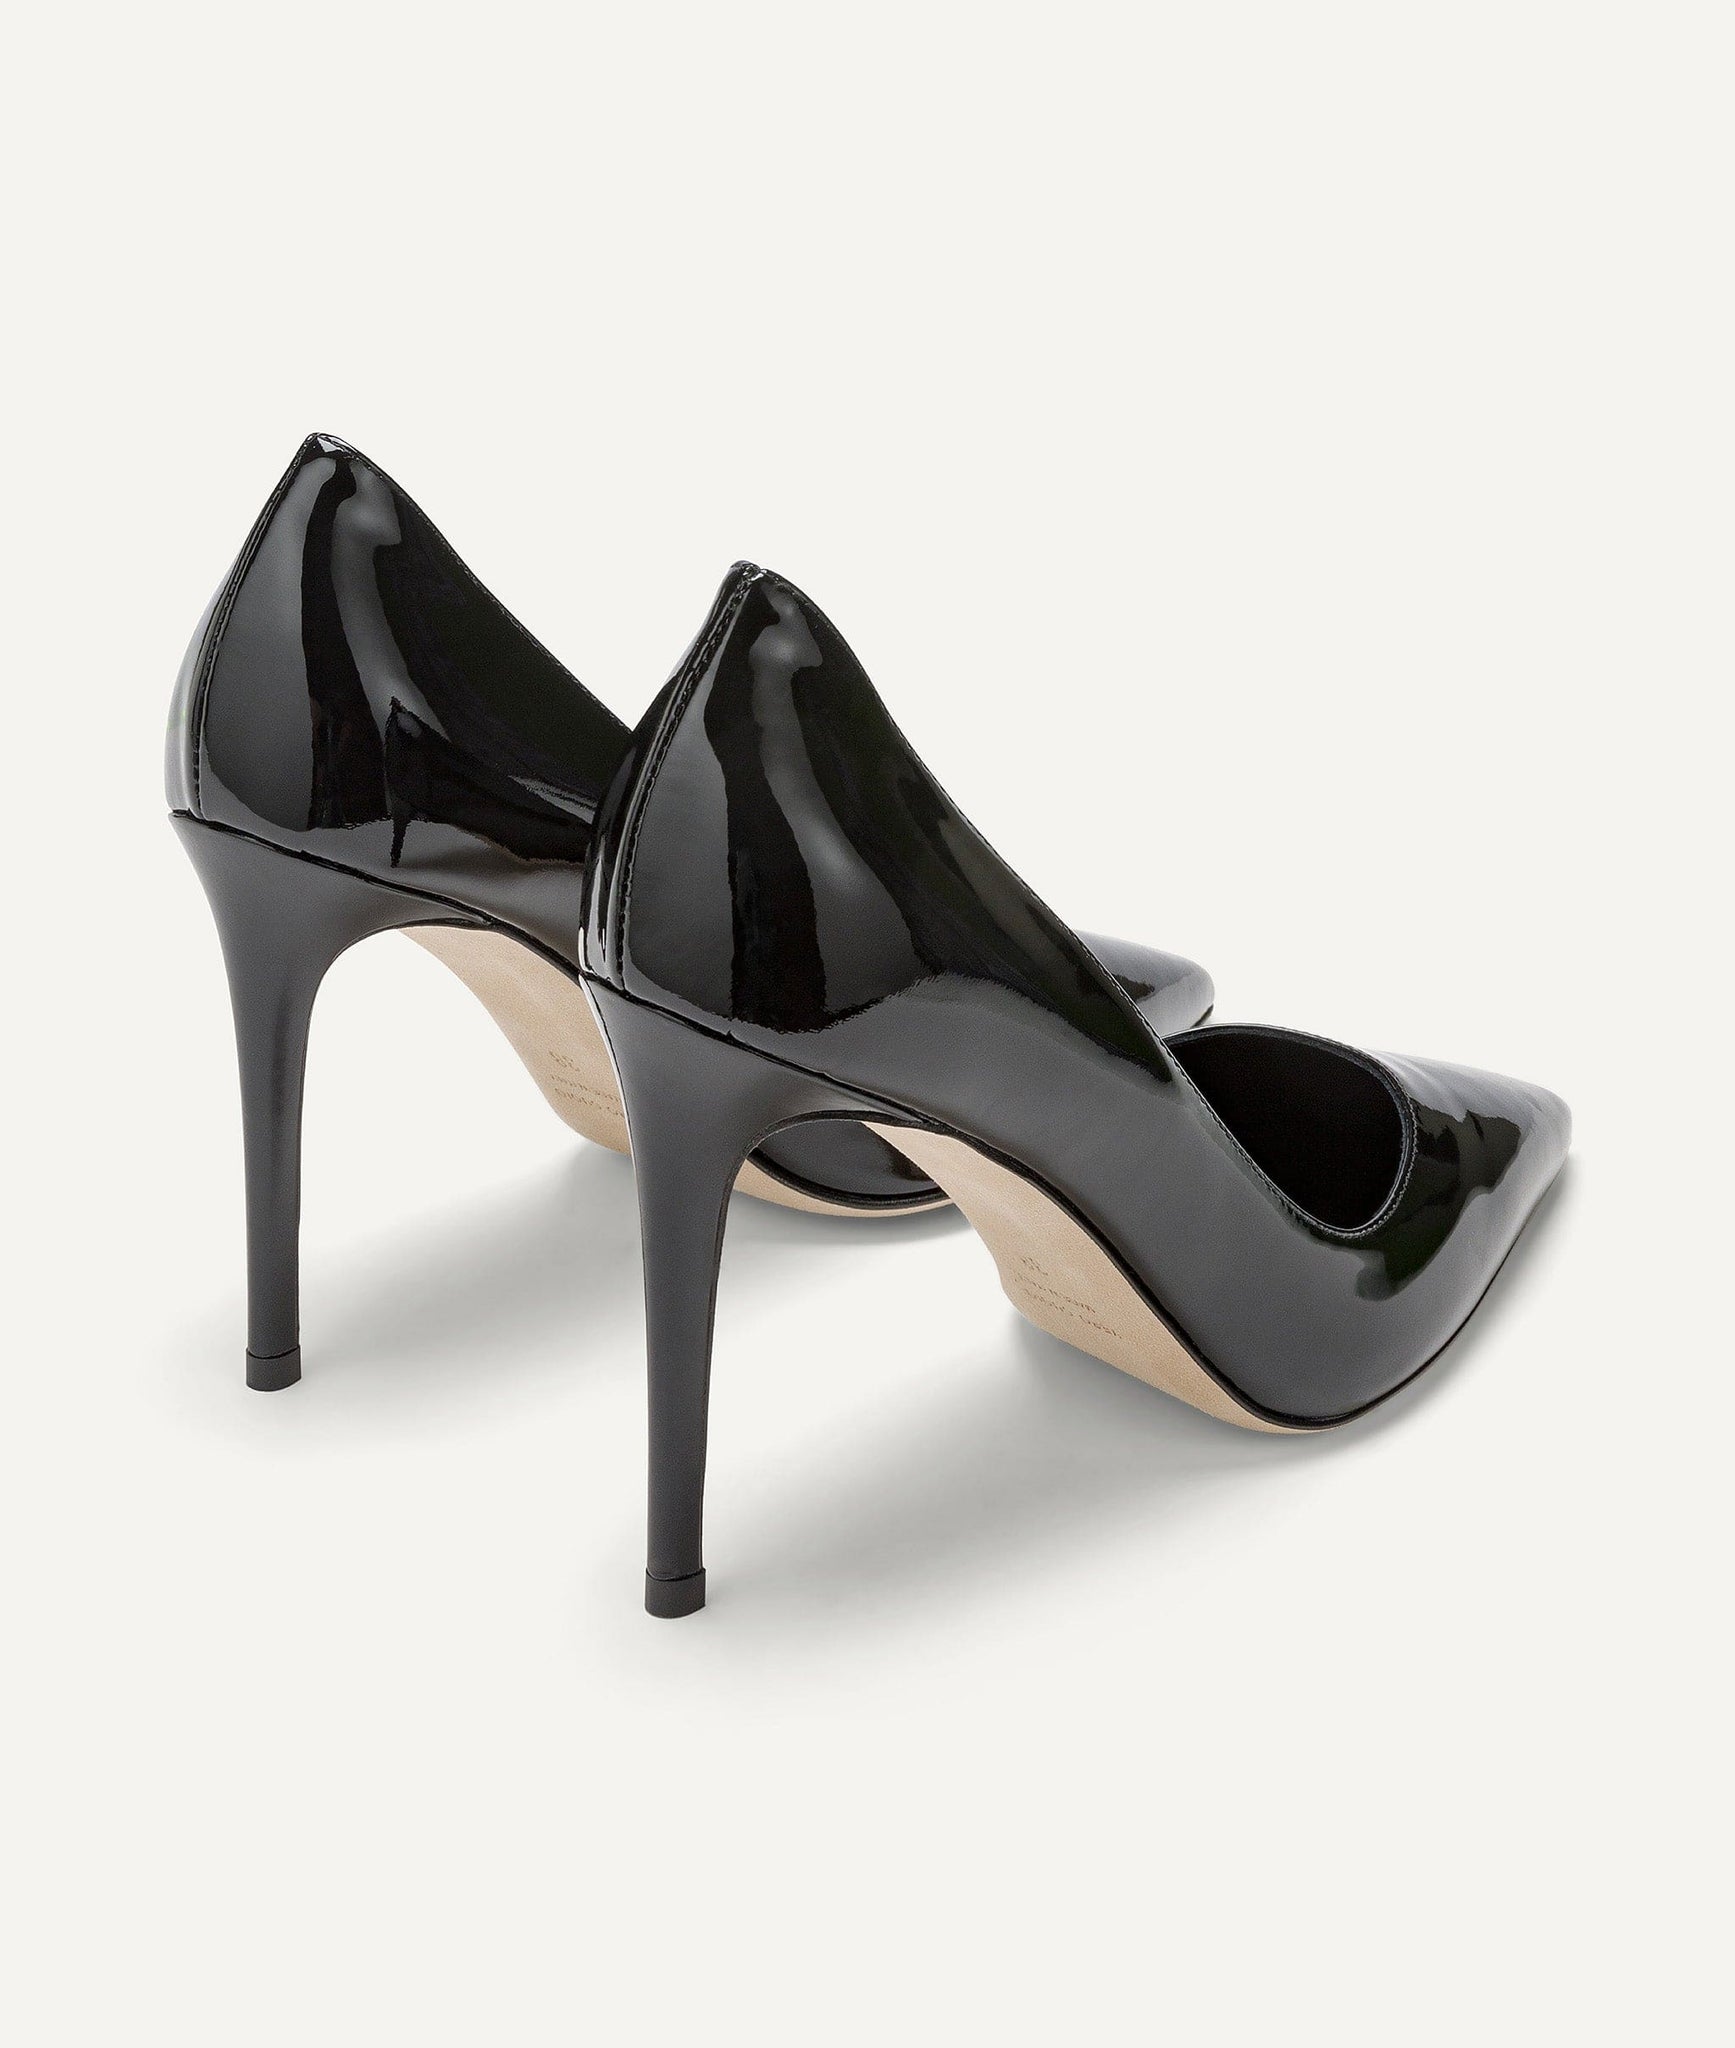 Pump Heels in Patent Leather